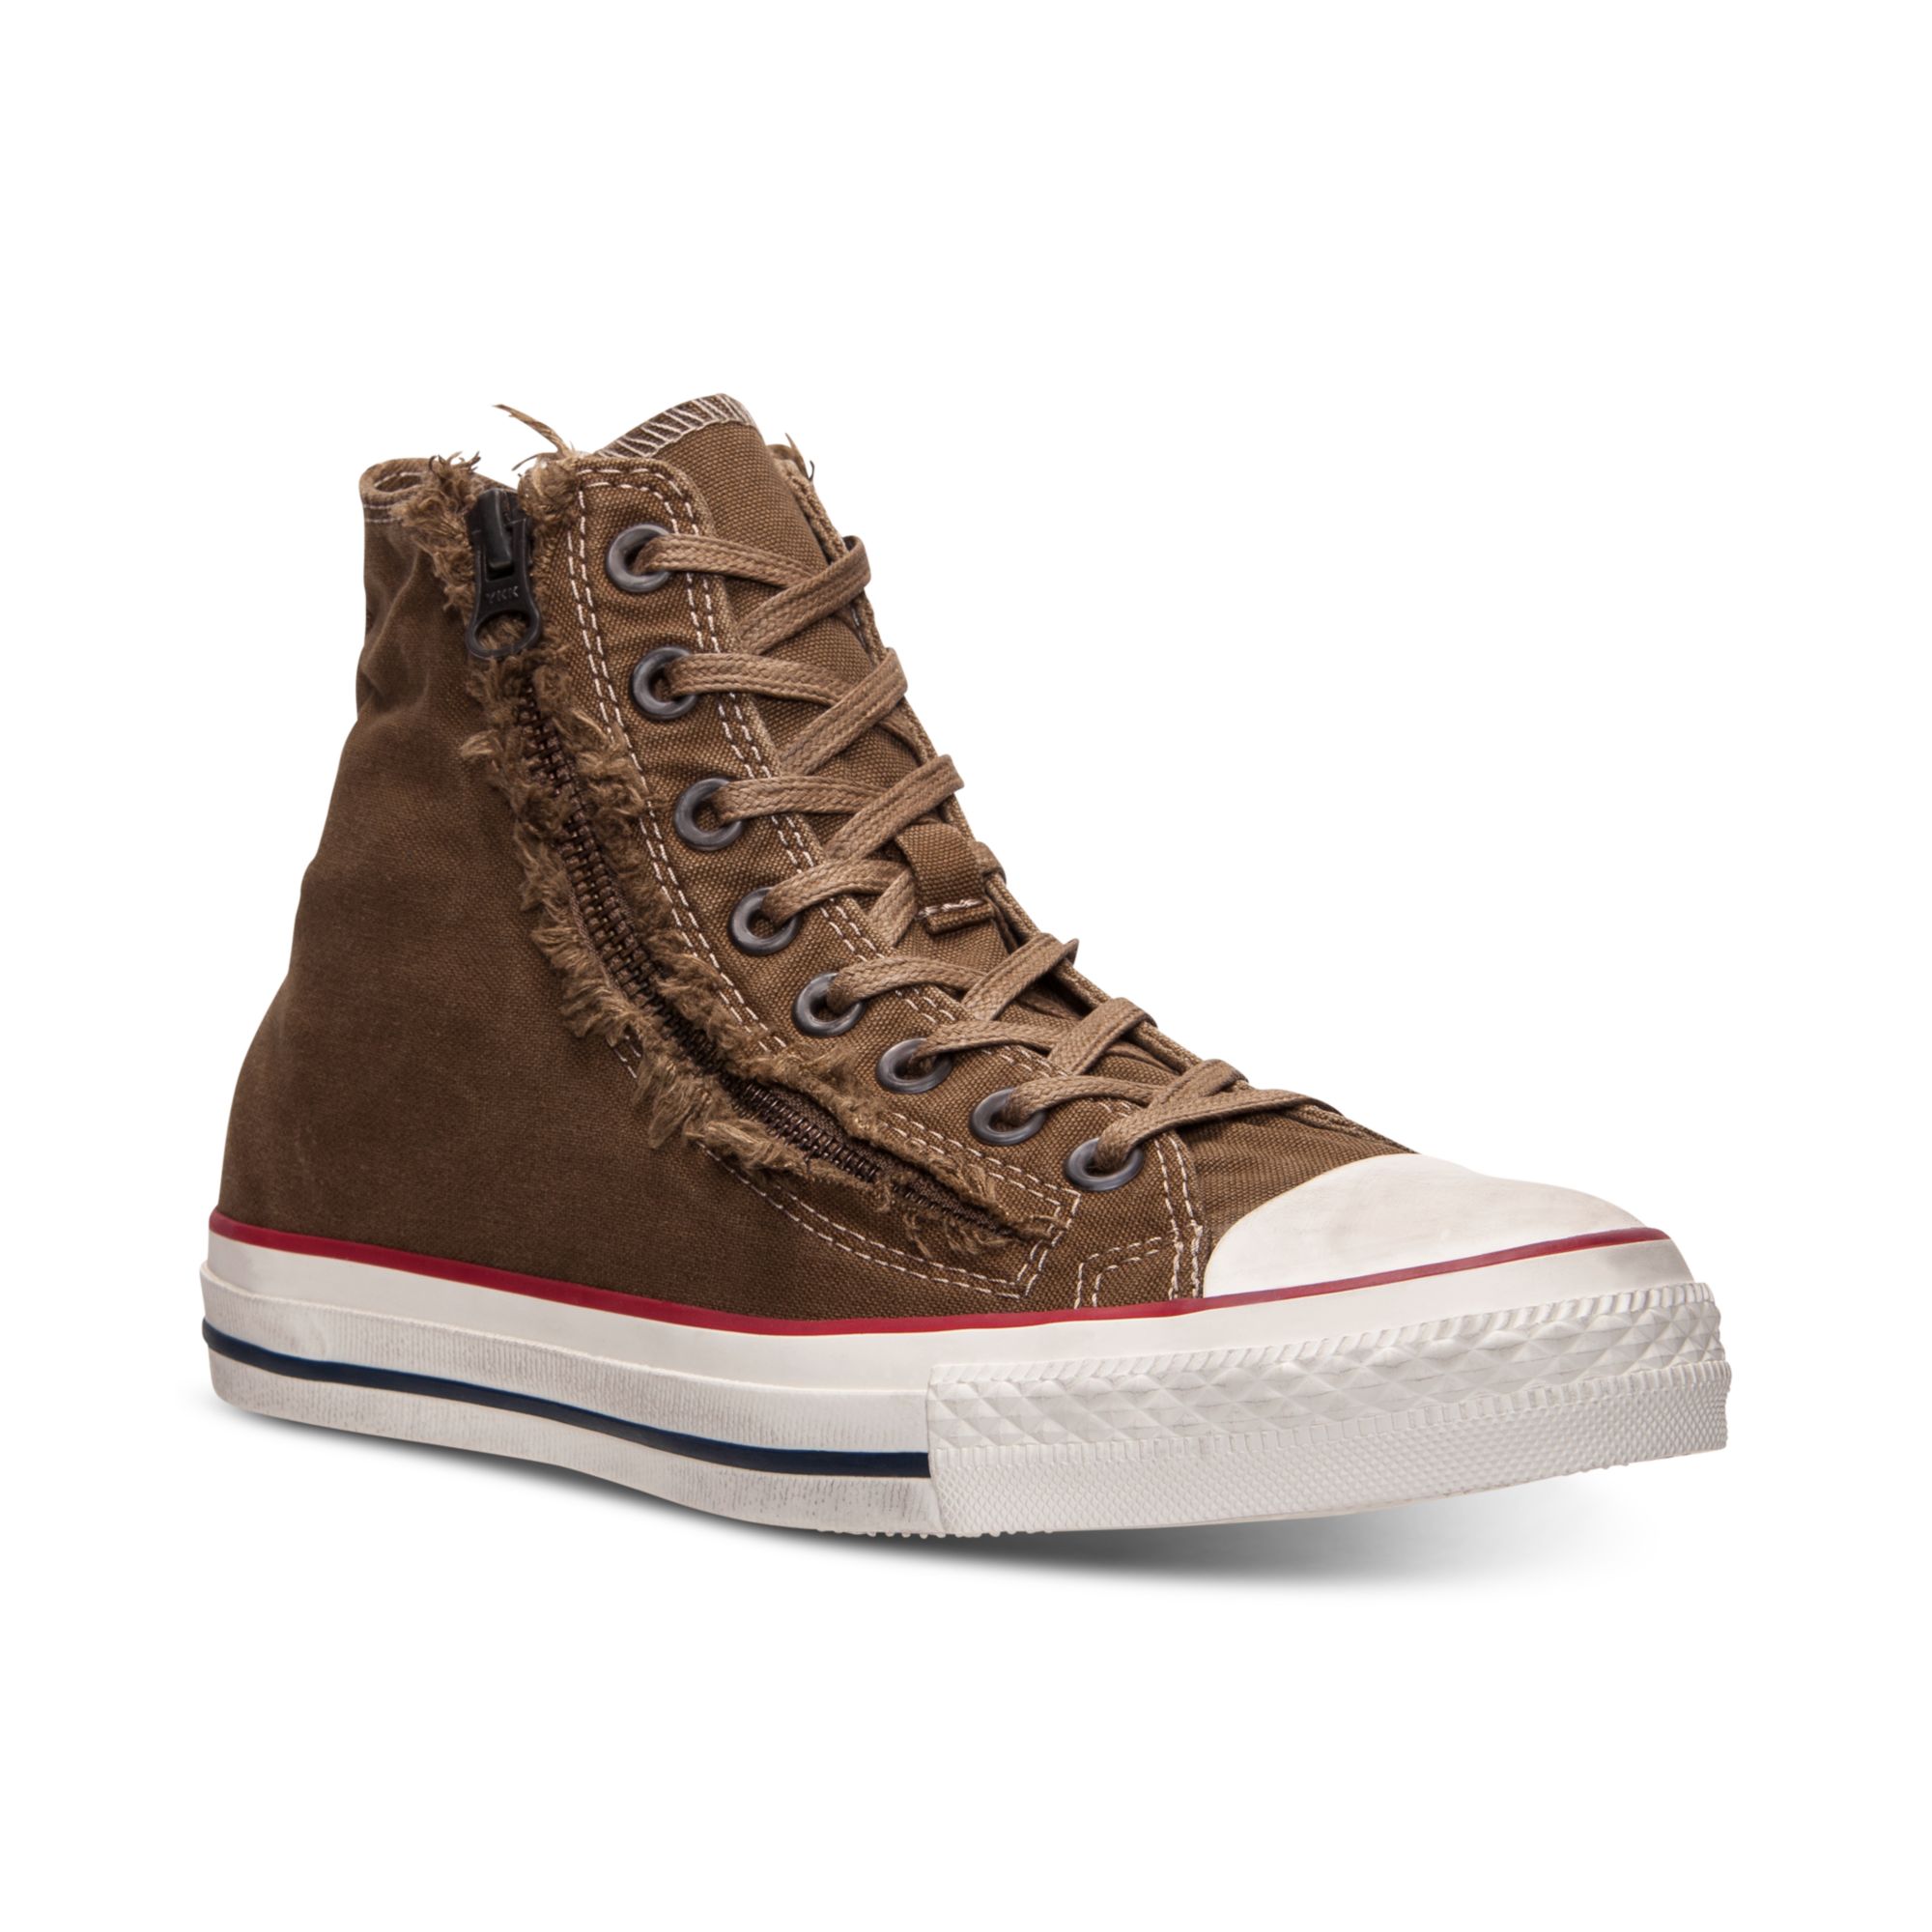 Converse Mens Chuck Taylor Double Zip Washed Canvas Hi Casual Sneakers ...